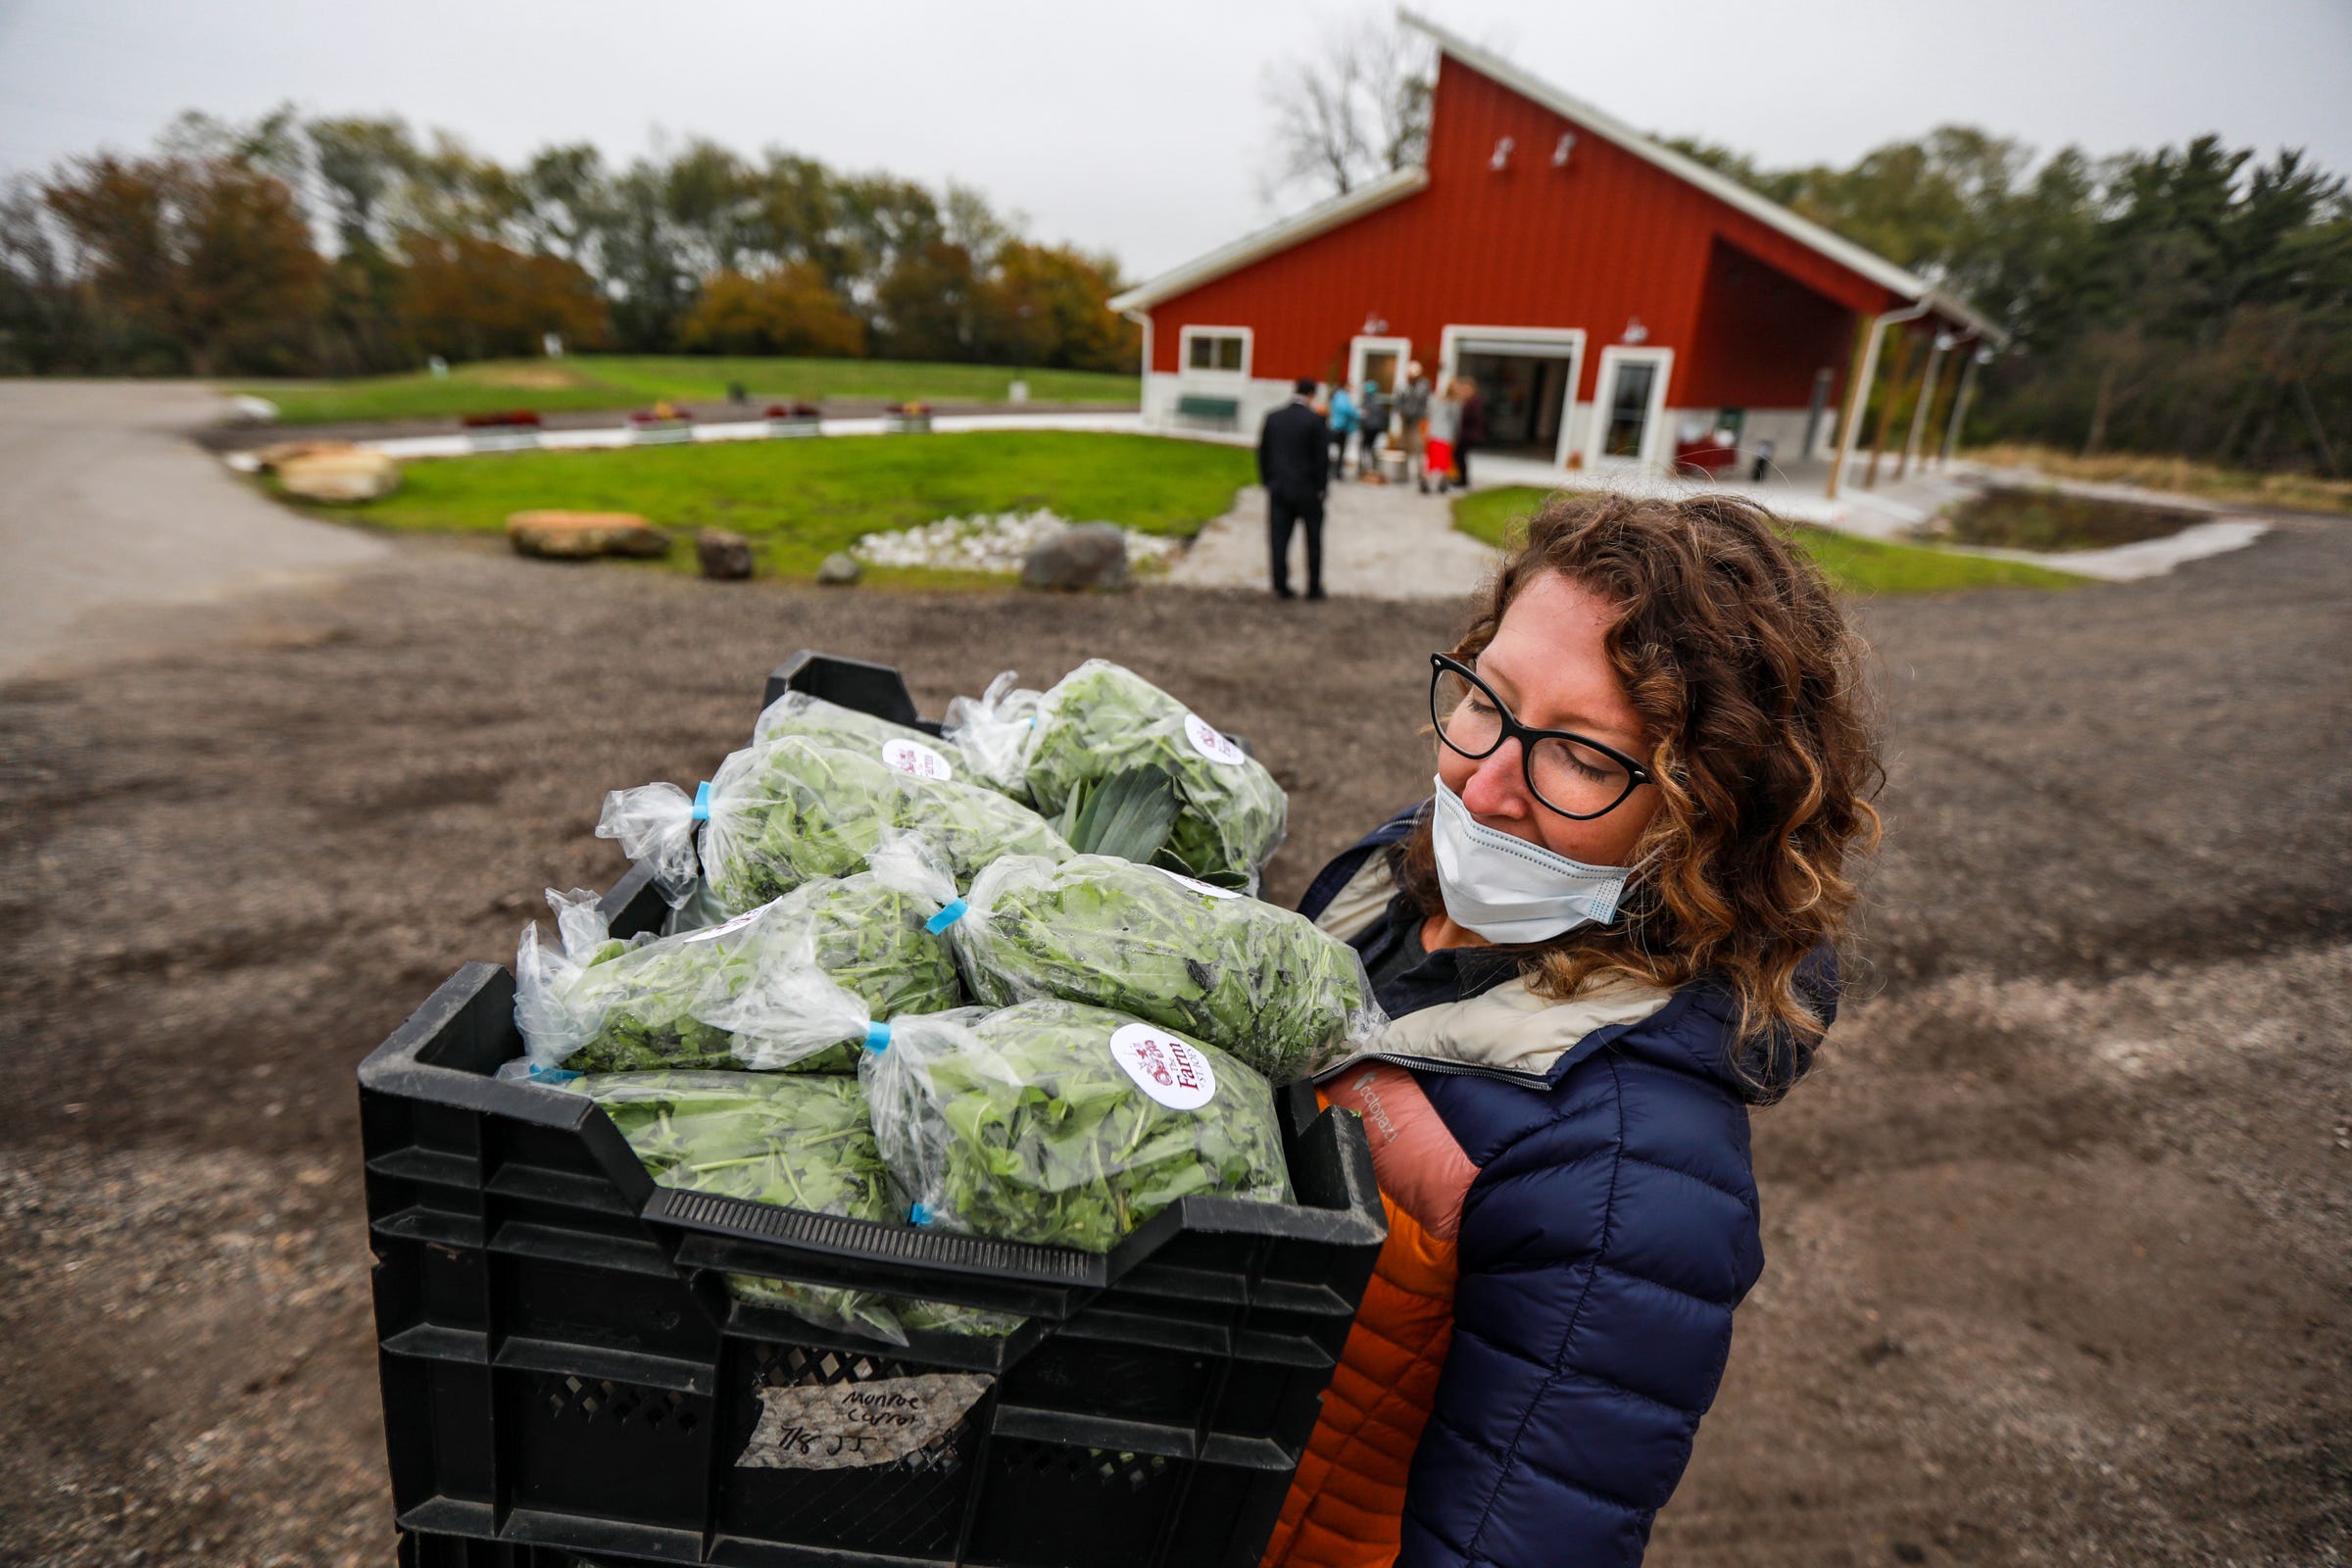 The Farm Program Manager Liz Tylander, moves crates of fresh produce from the Farm at Saint Joseph Mercy Health System to deliver to the hospital for the Patients-to-Produce program in Ann Arbor on Oct. 27, 2021. In 2020, The Farm donated more than 6,300 pounds of produce to 3,600 health care providers and 1,300 patients. In addition, the Ann Arbor farm distributed 11,500 boxes of Michigan produce to members of the community, including 83 food-insecure families.